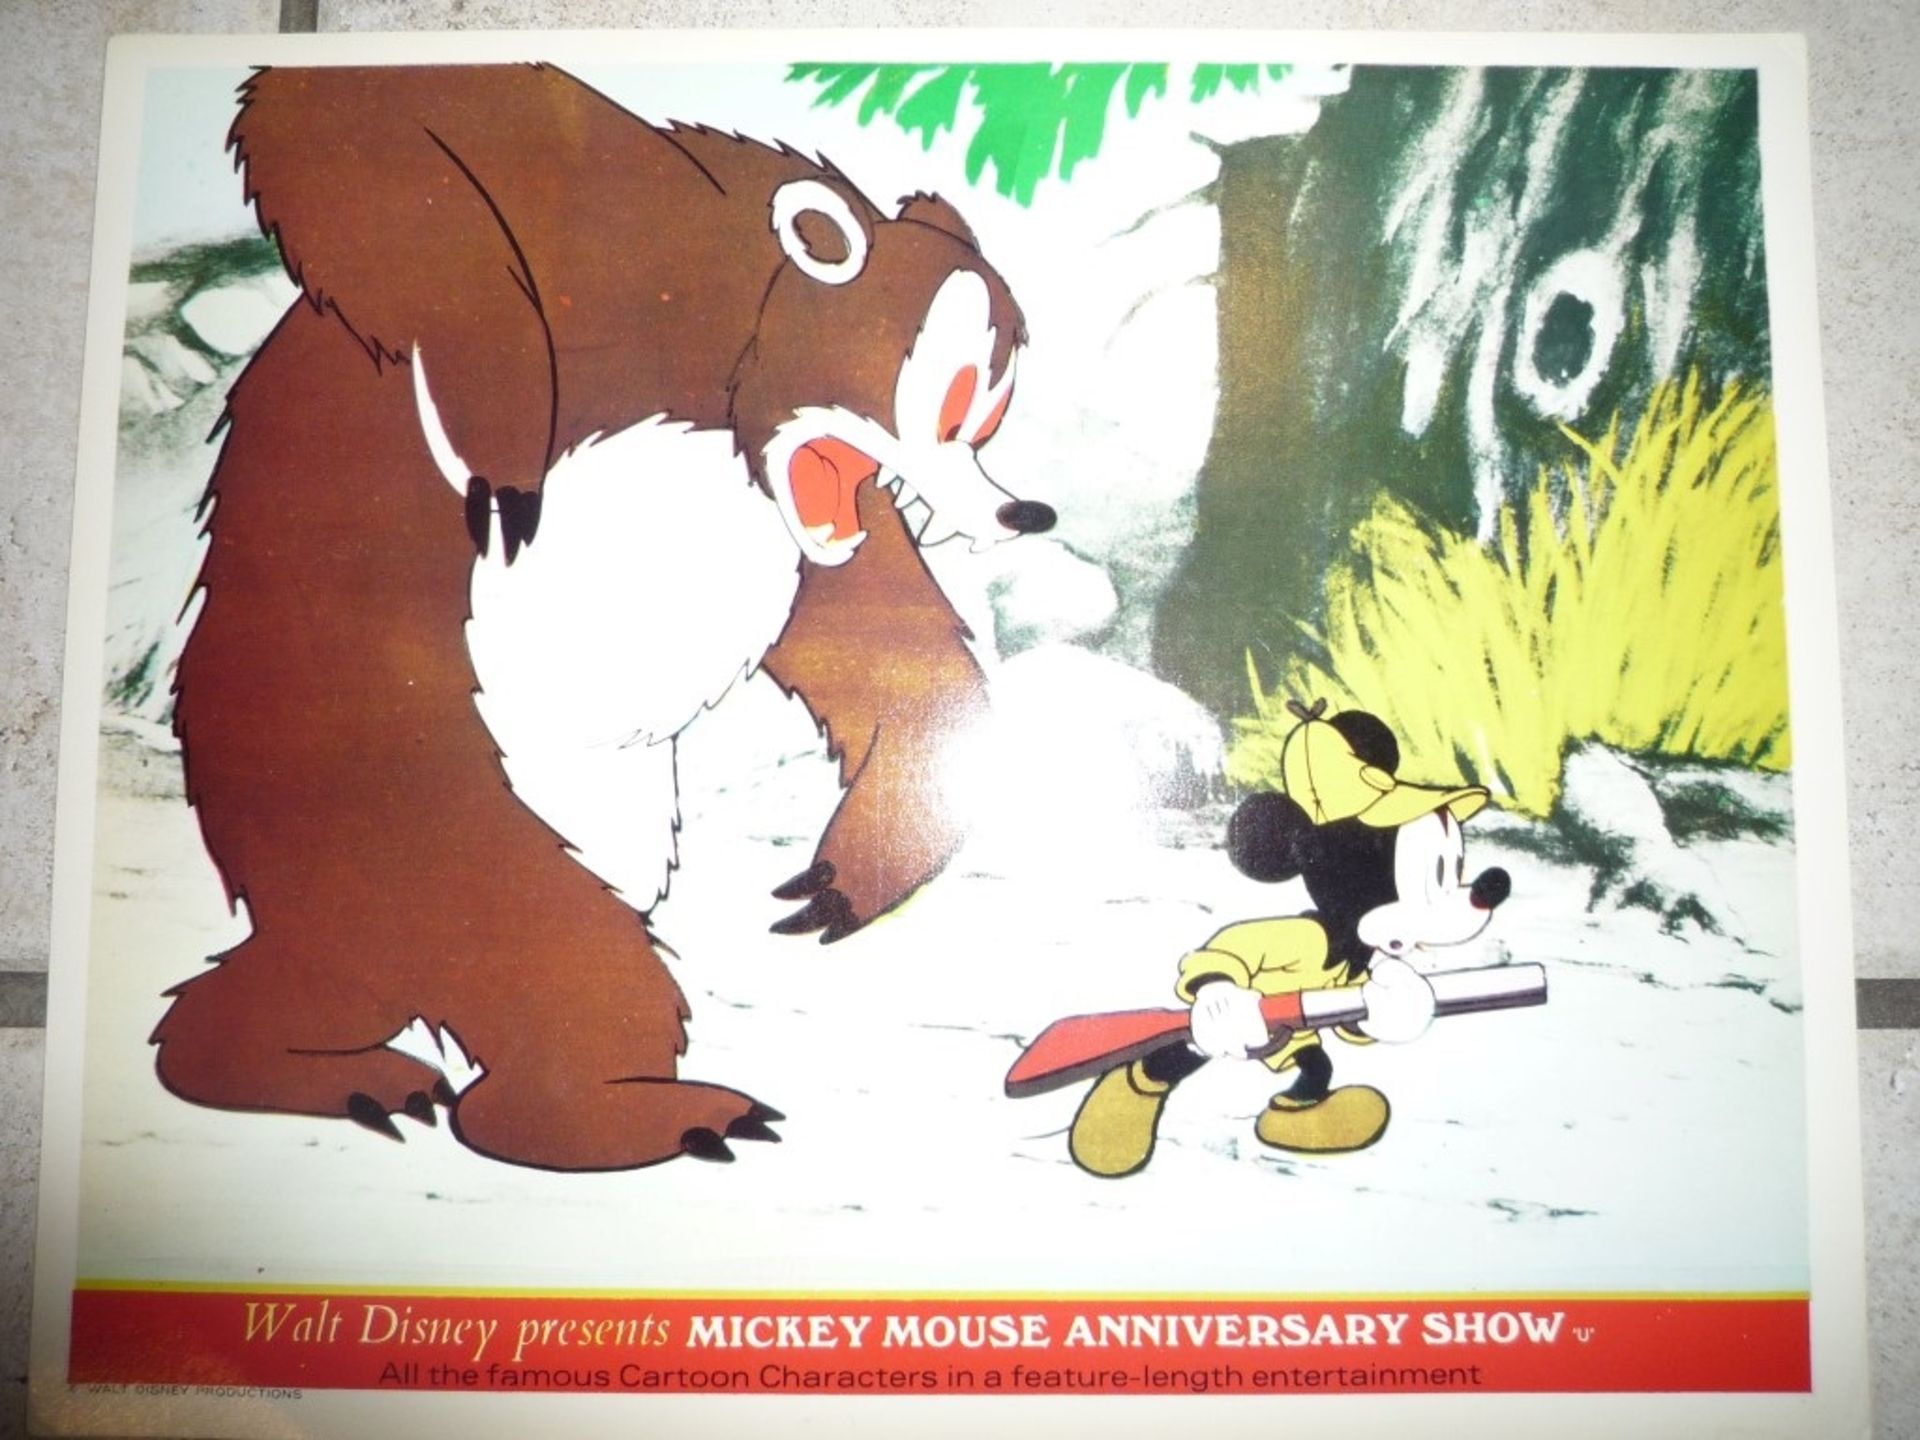 Mickey Mouse Anniversary Show cards - Image 2 of 2